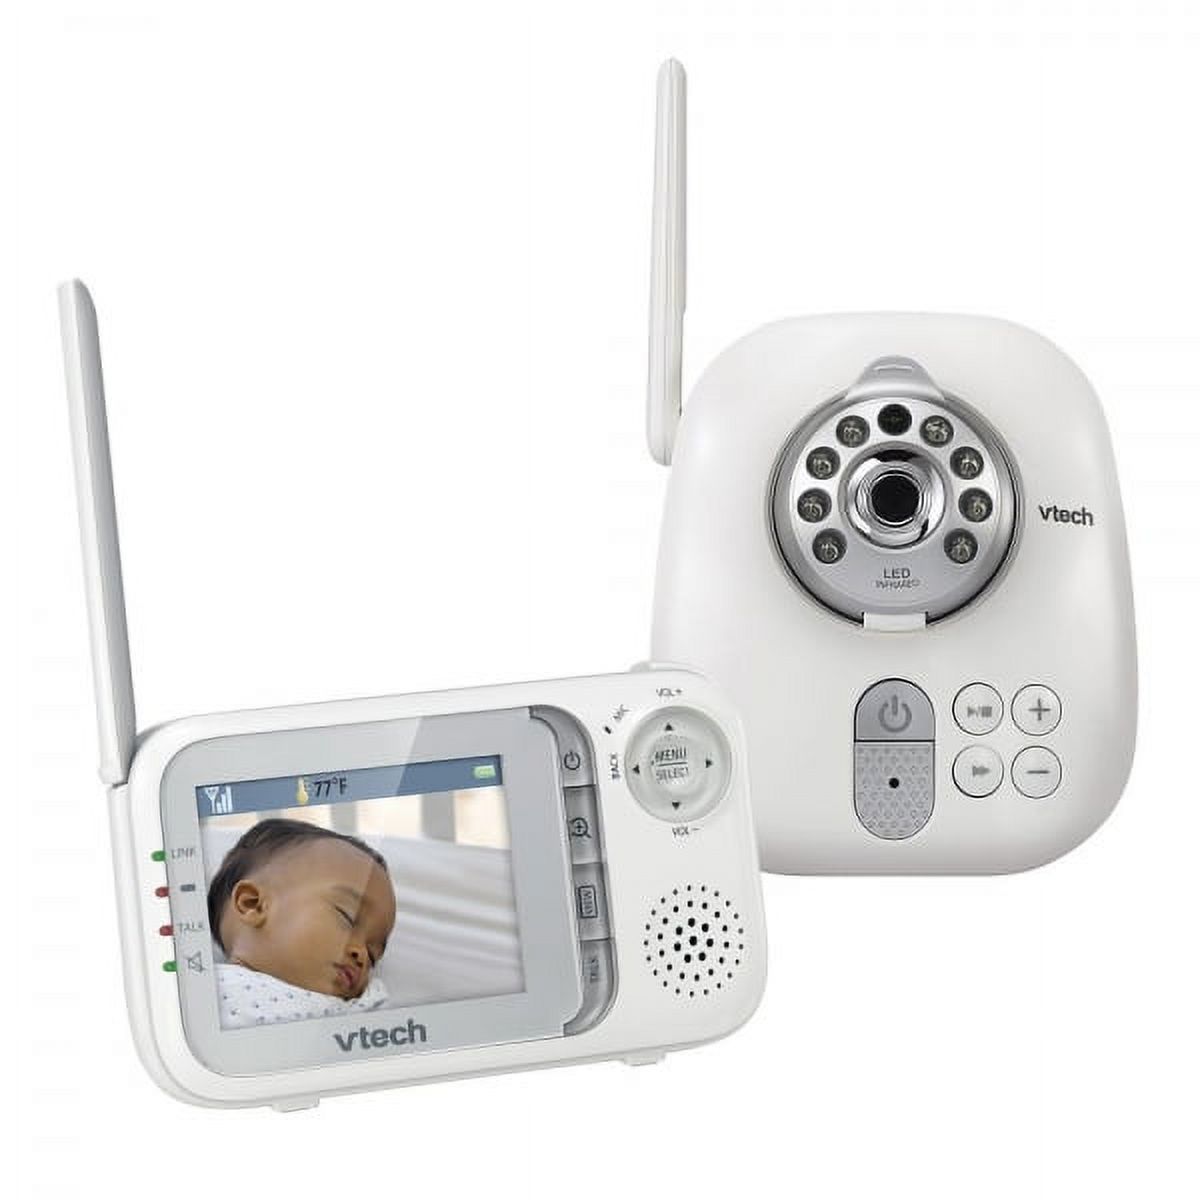 VTech VM321 2.4 gHz Full Color Video and Audio Baby Monitor - image 1 of 2